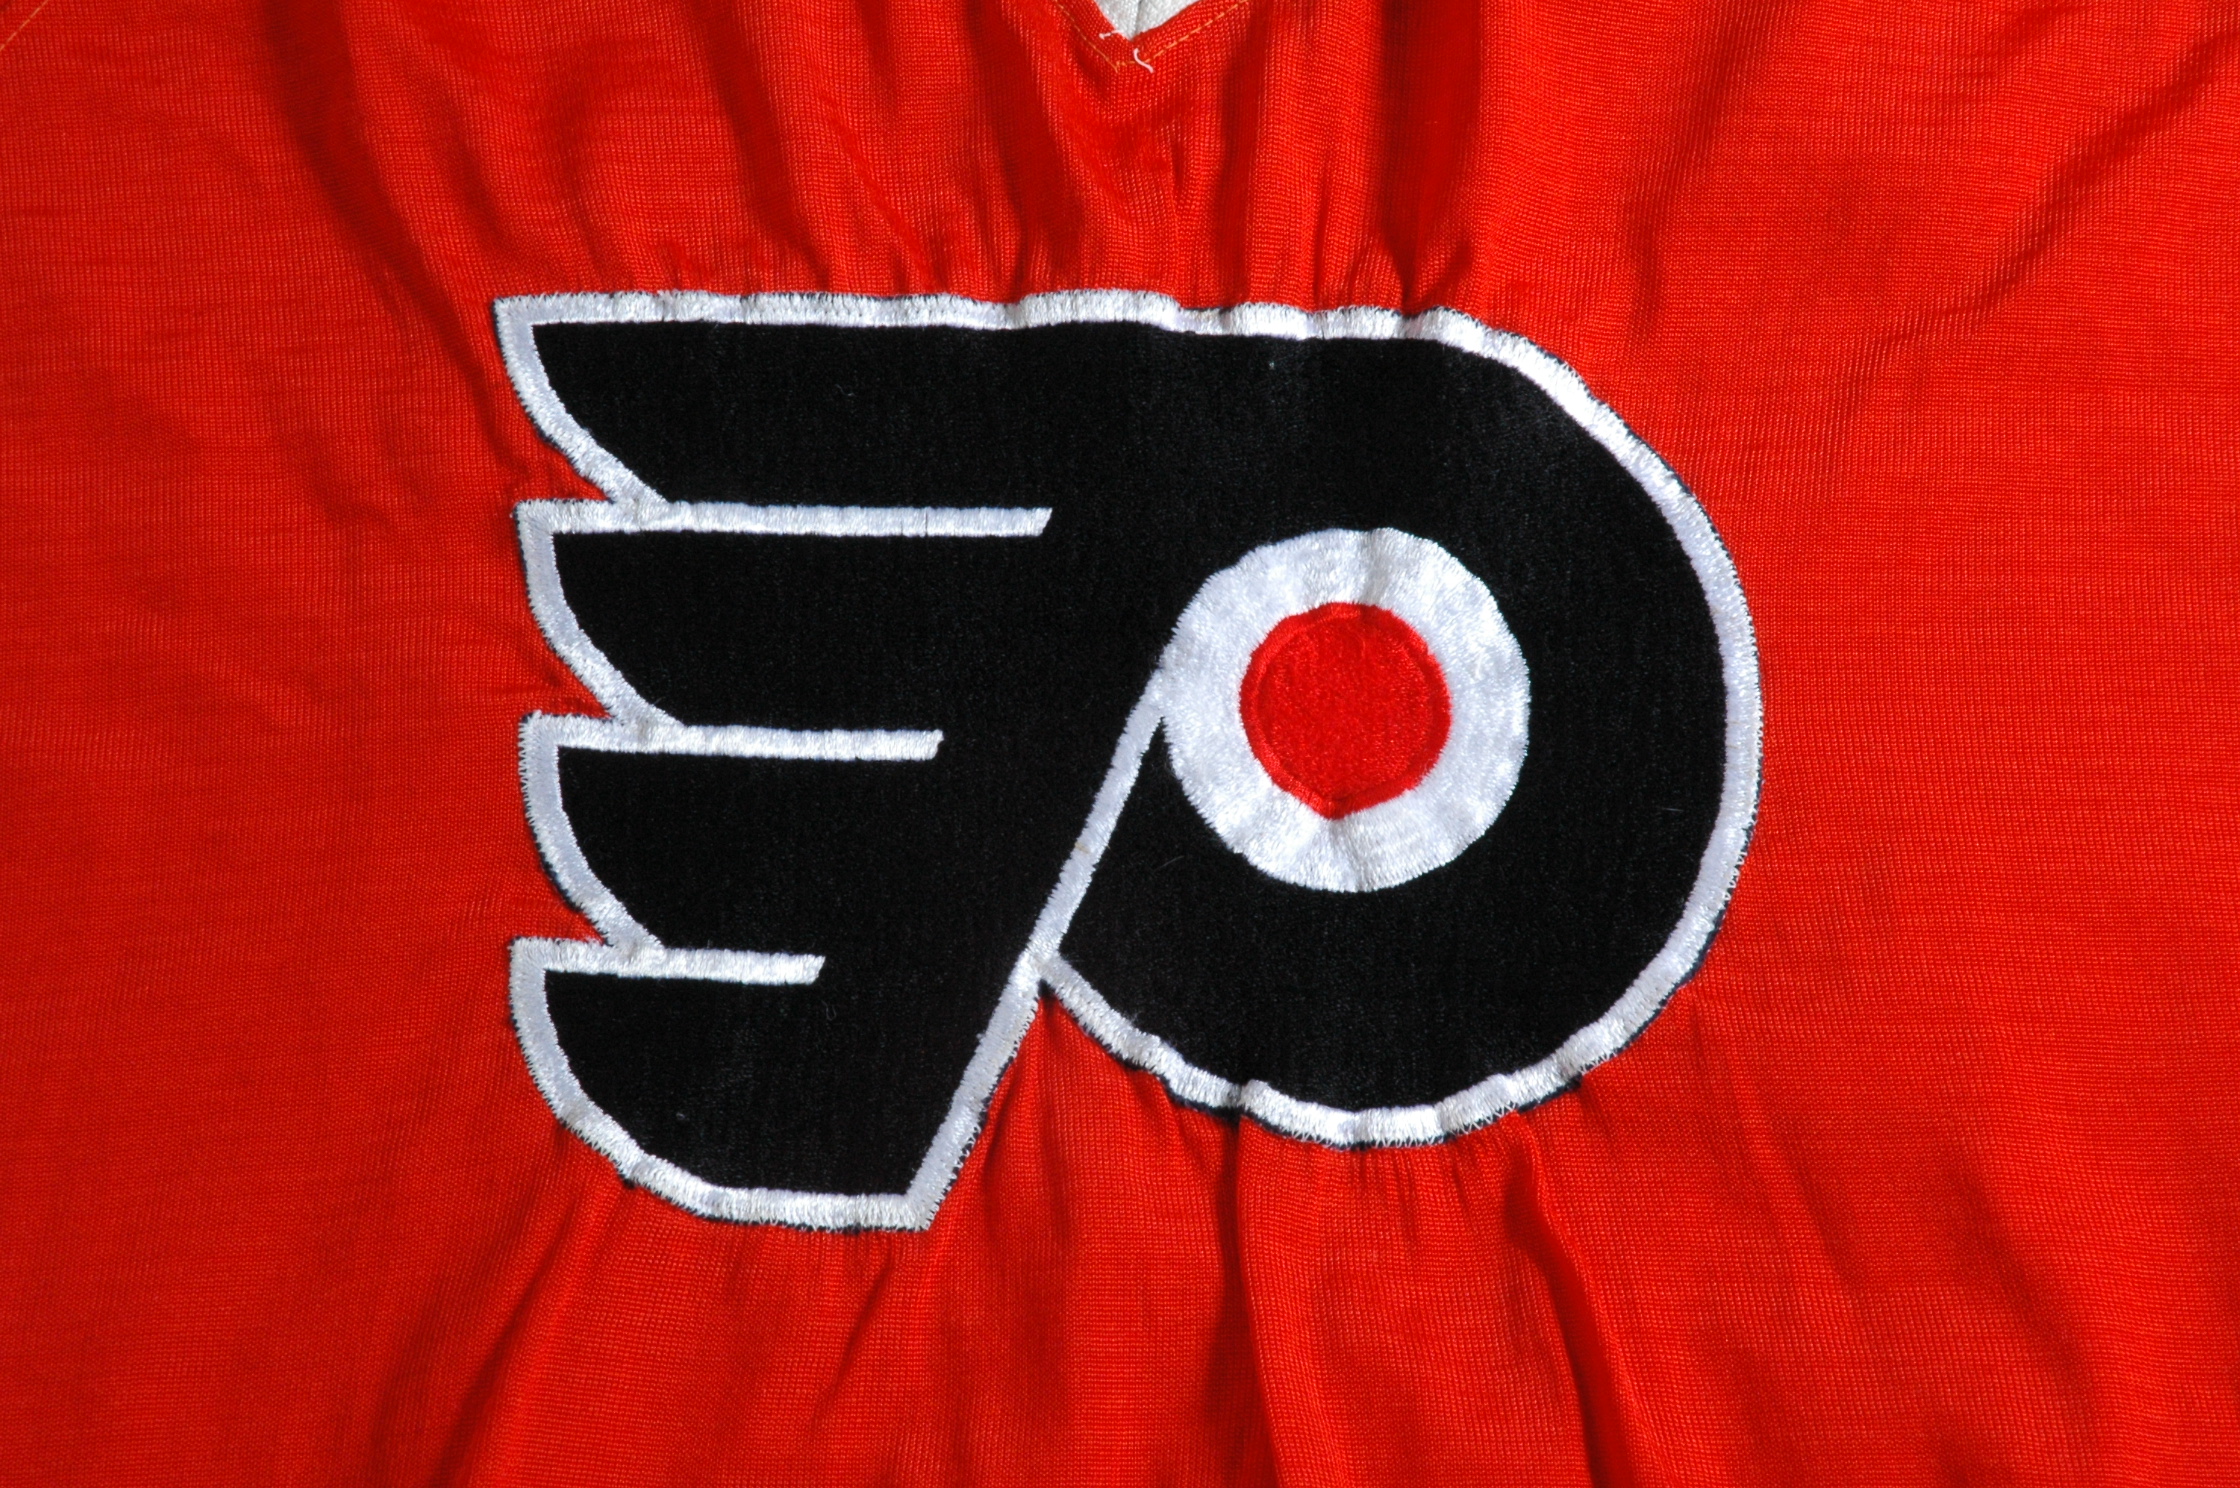 Philadelphia Flyers 1968-69 jersey artwork, This is a highl…